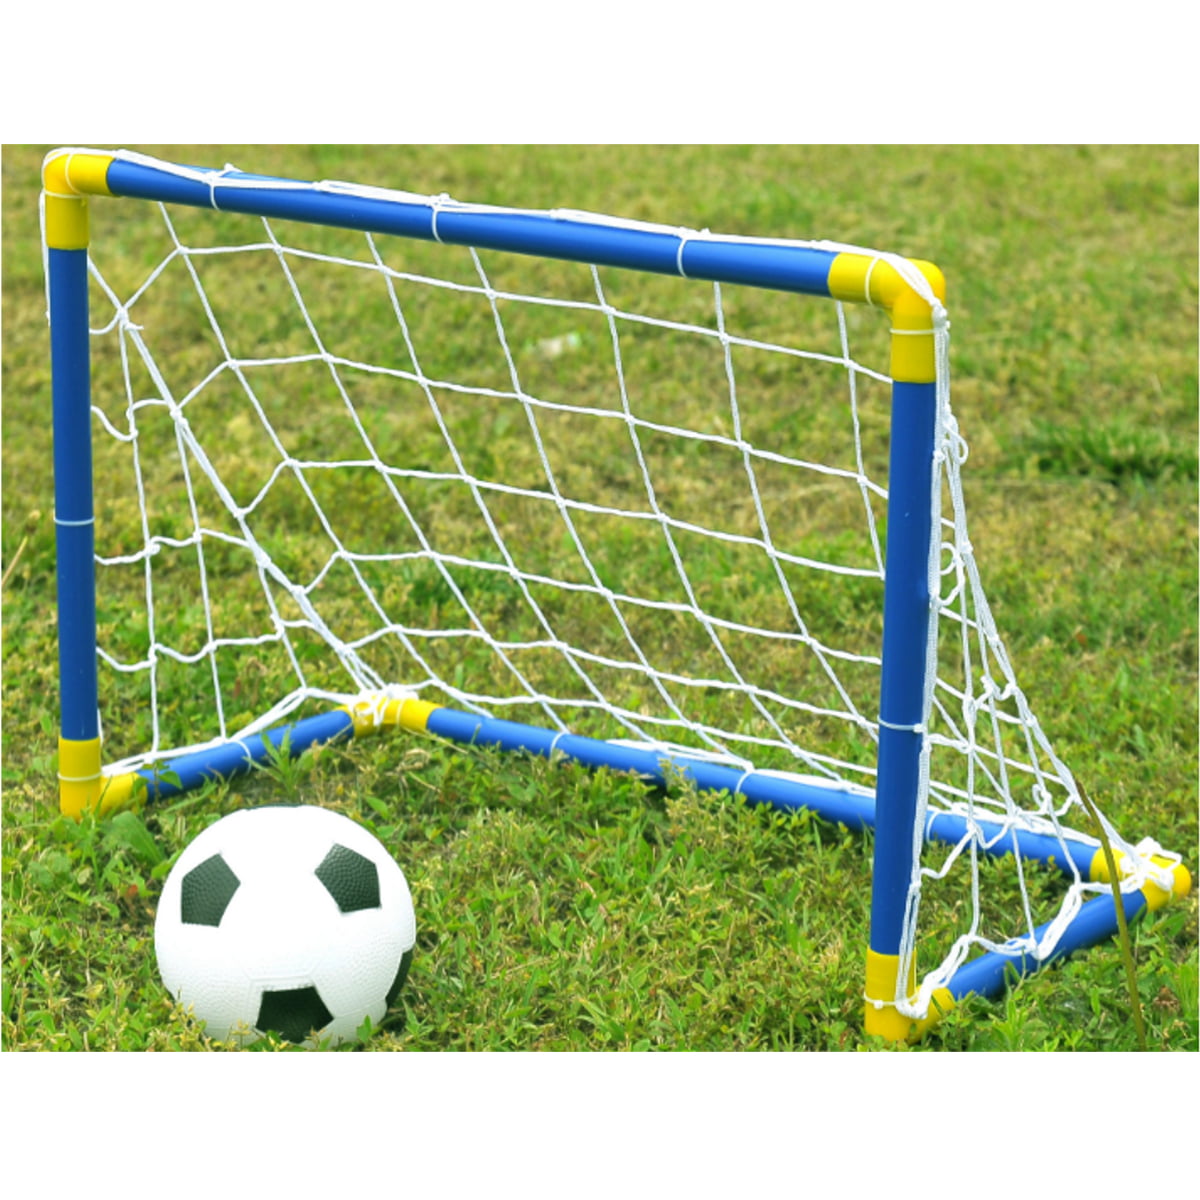 Football Soccer Goal Post Net practice training Replace Sports net Only Kid gift 